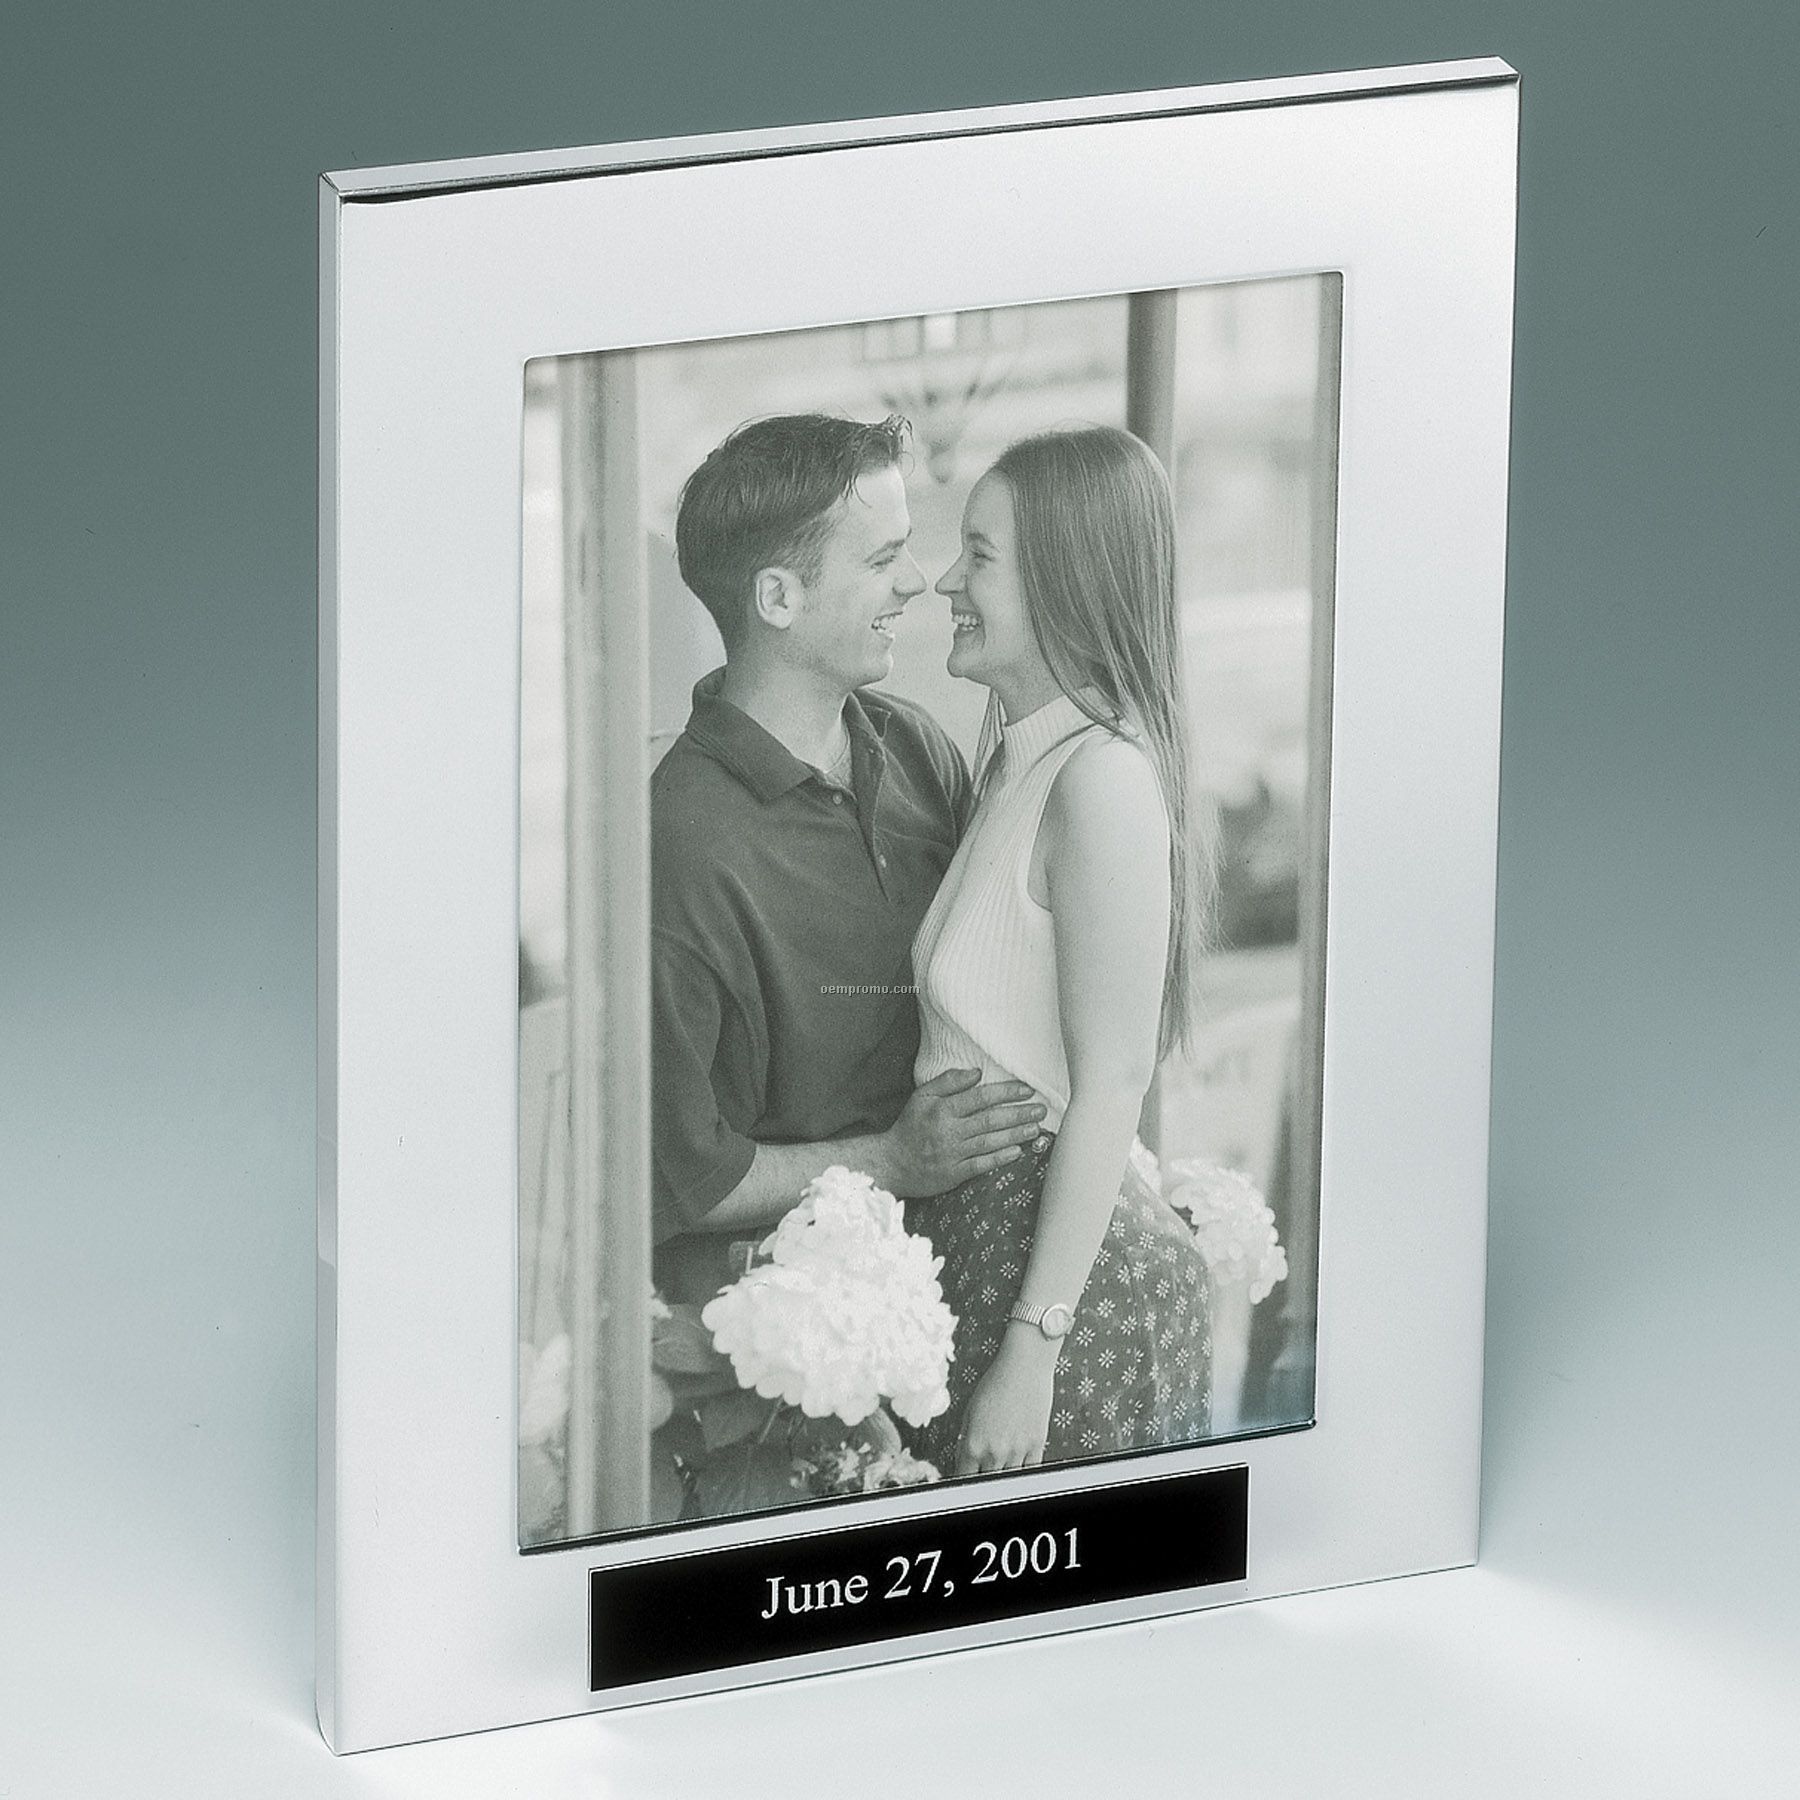 Polished Silver Aluminum Picture Frame